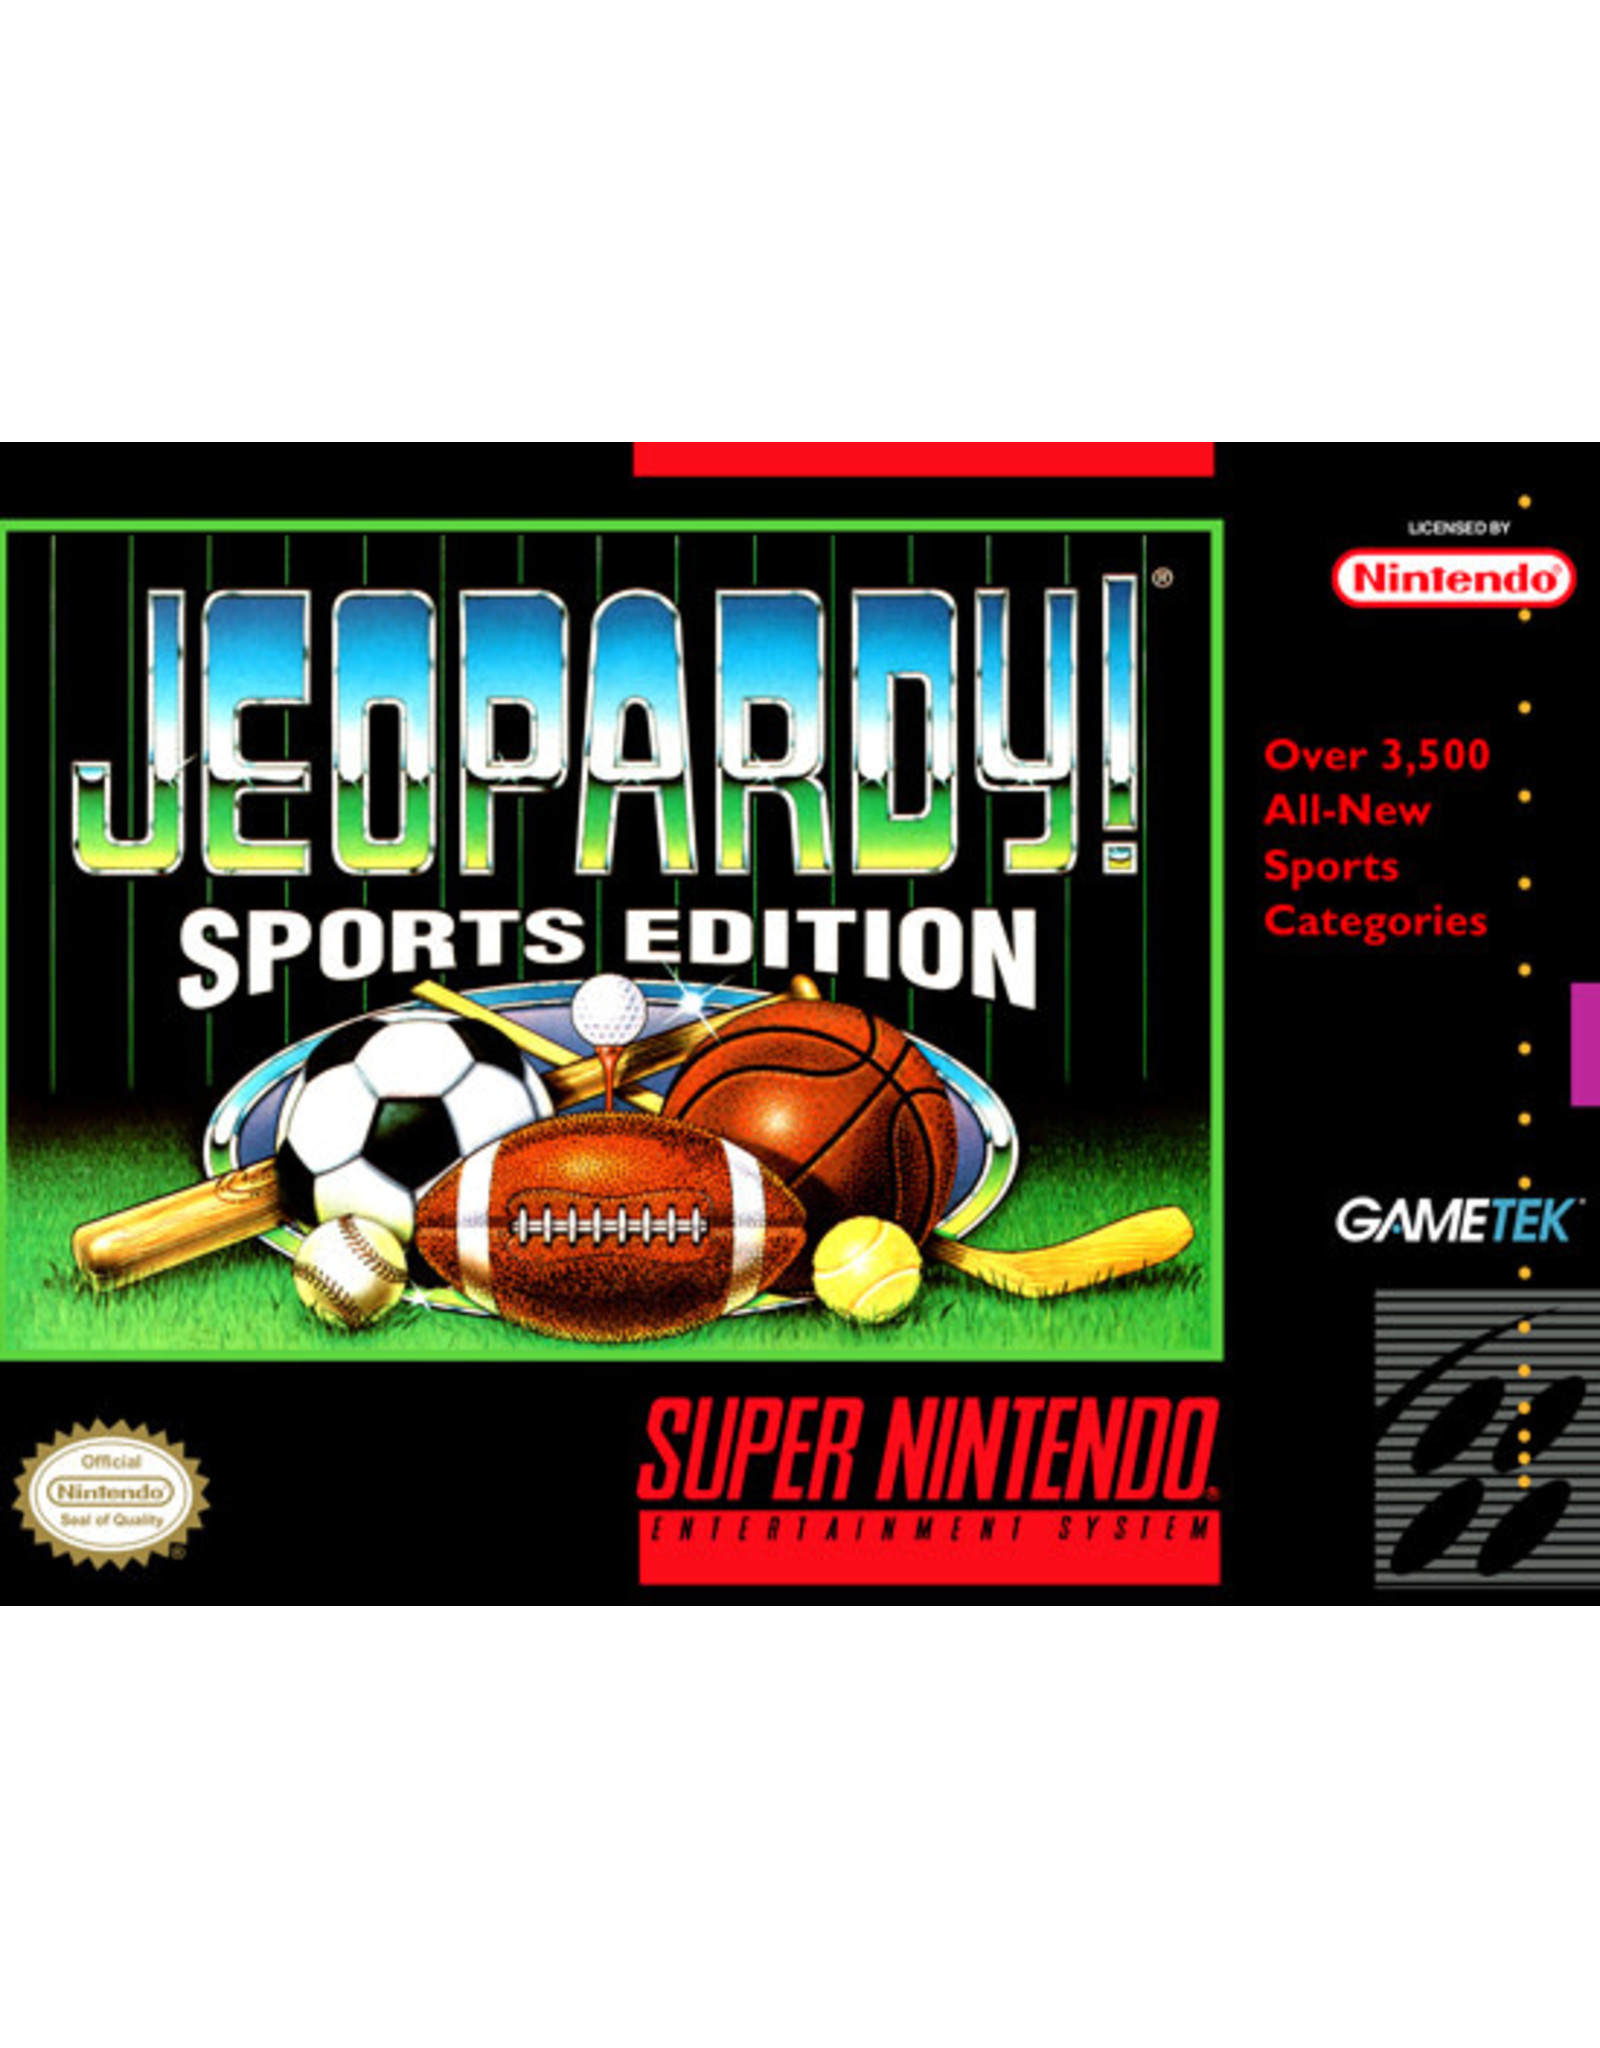 Super Nintendo Jeopardy Sports Edition (Cart Only)